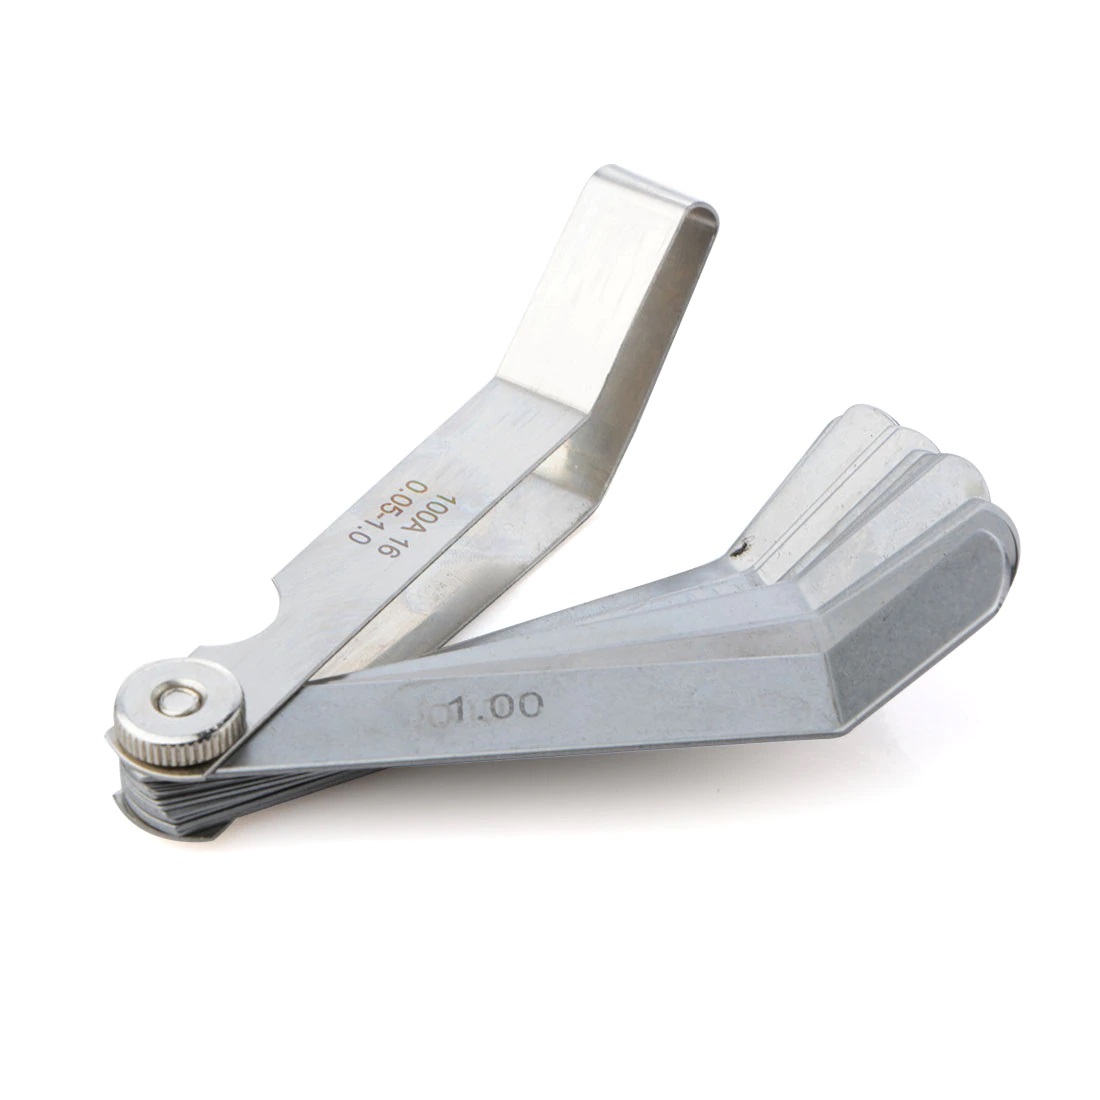 Bend feeler gauge for assessing tight spaces accurately.